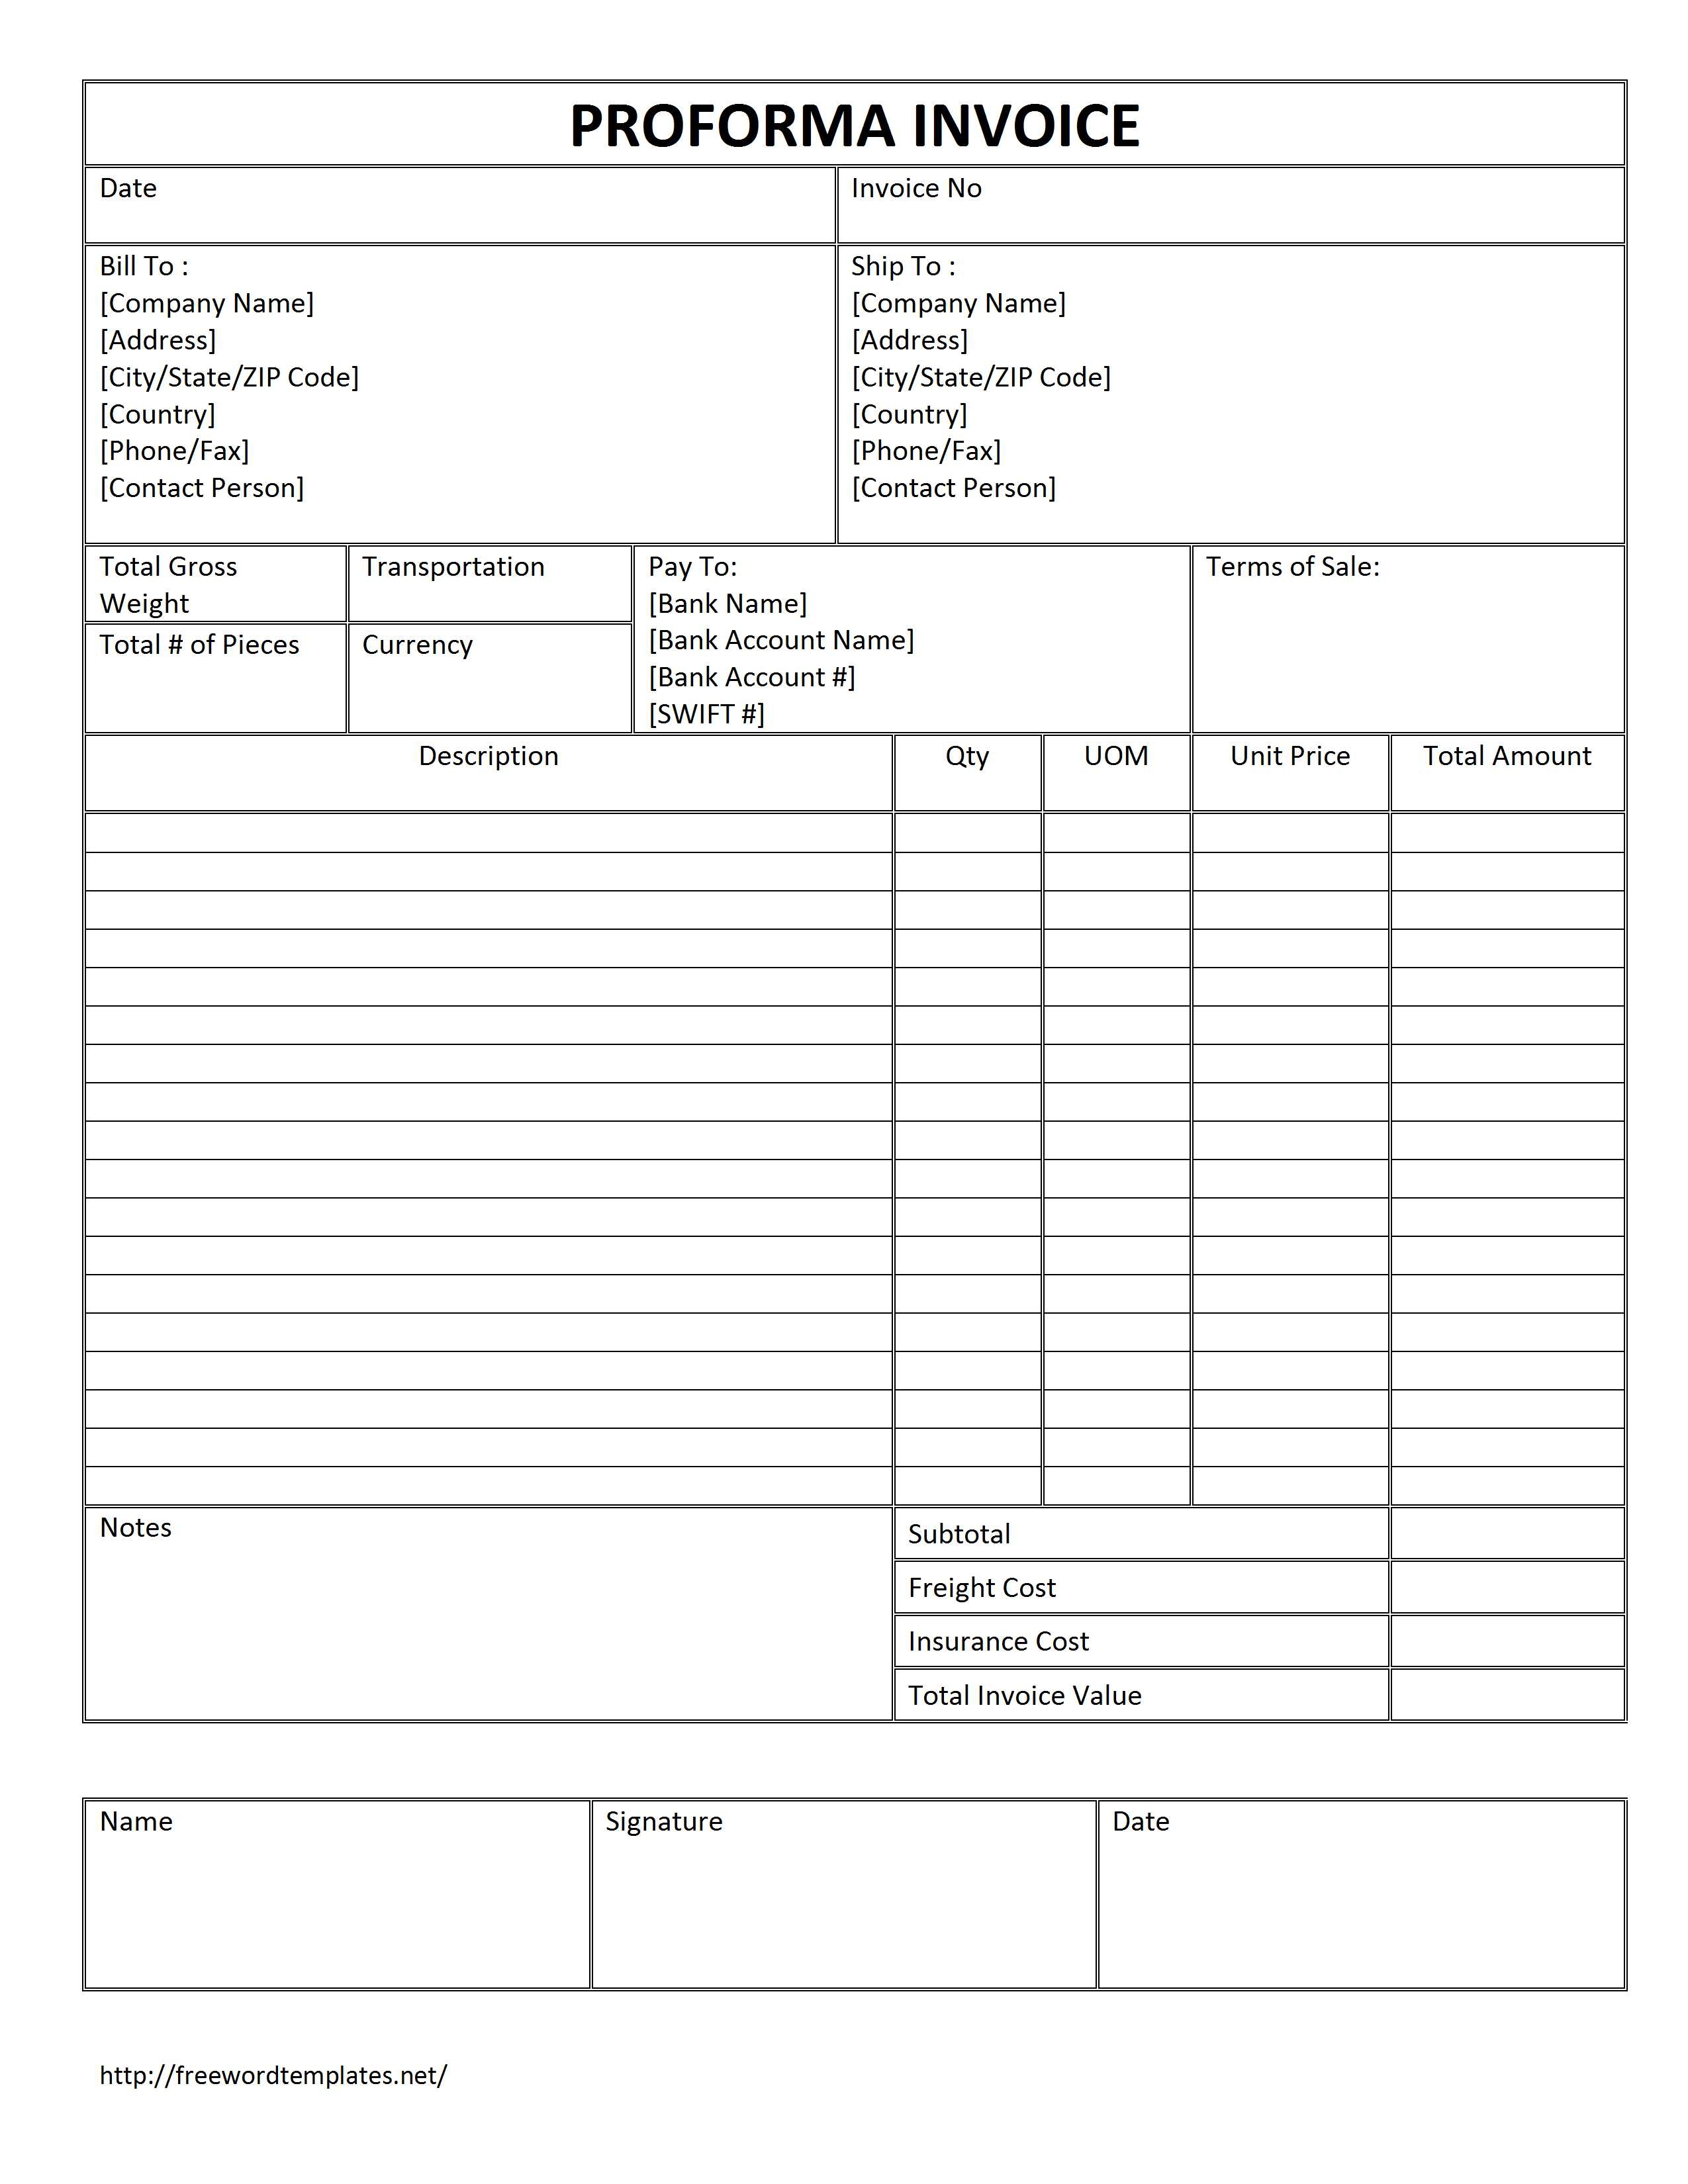 proforma invoice format for advance payment proforma invoice freewordtemplates 2550 X 3300